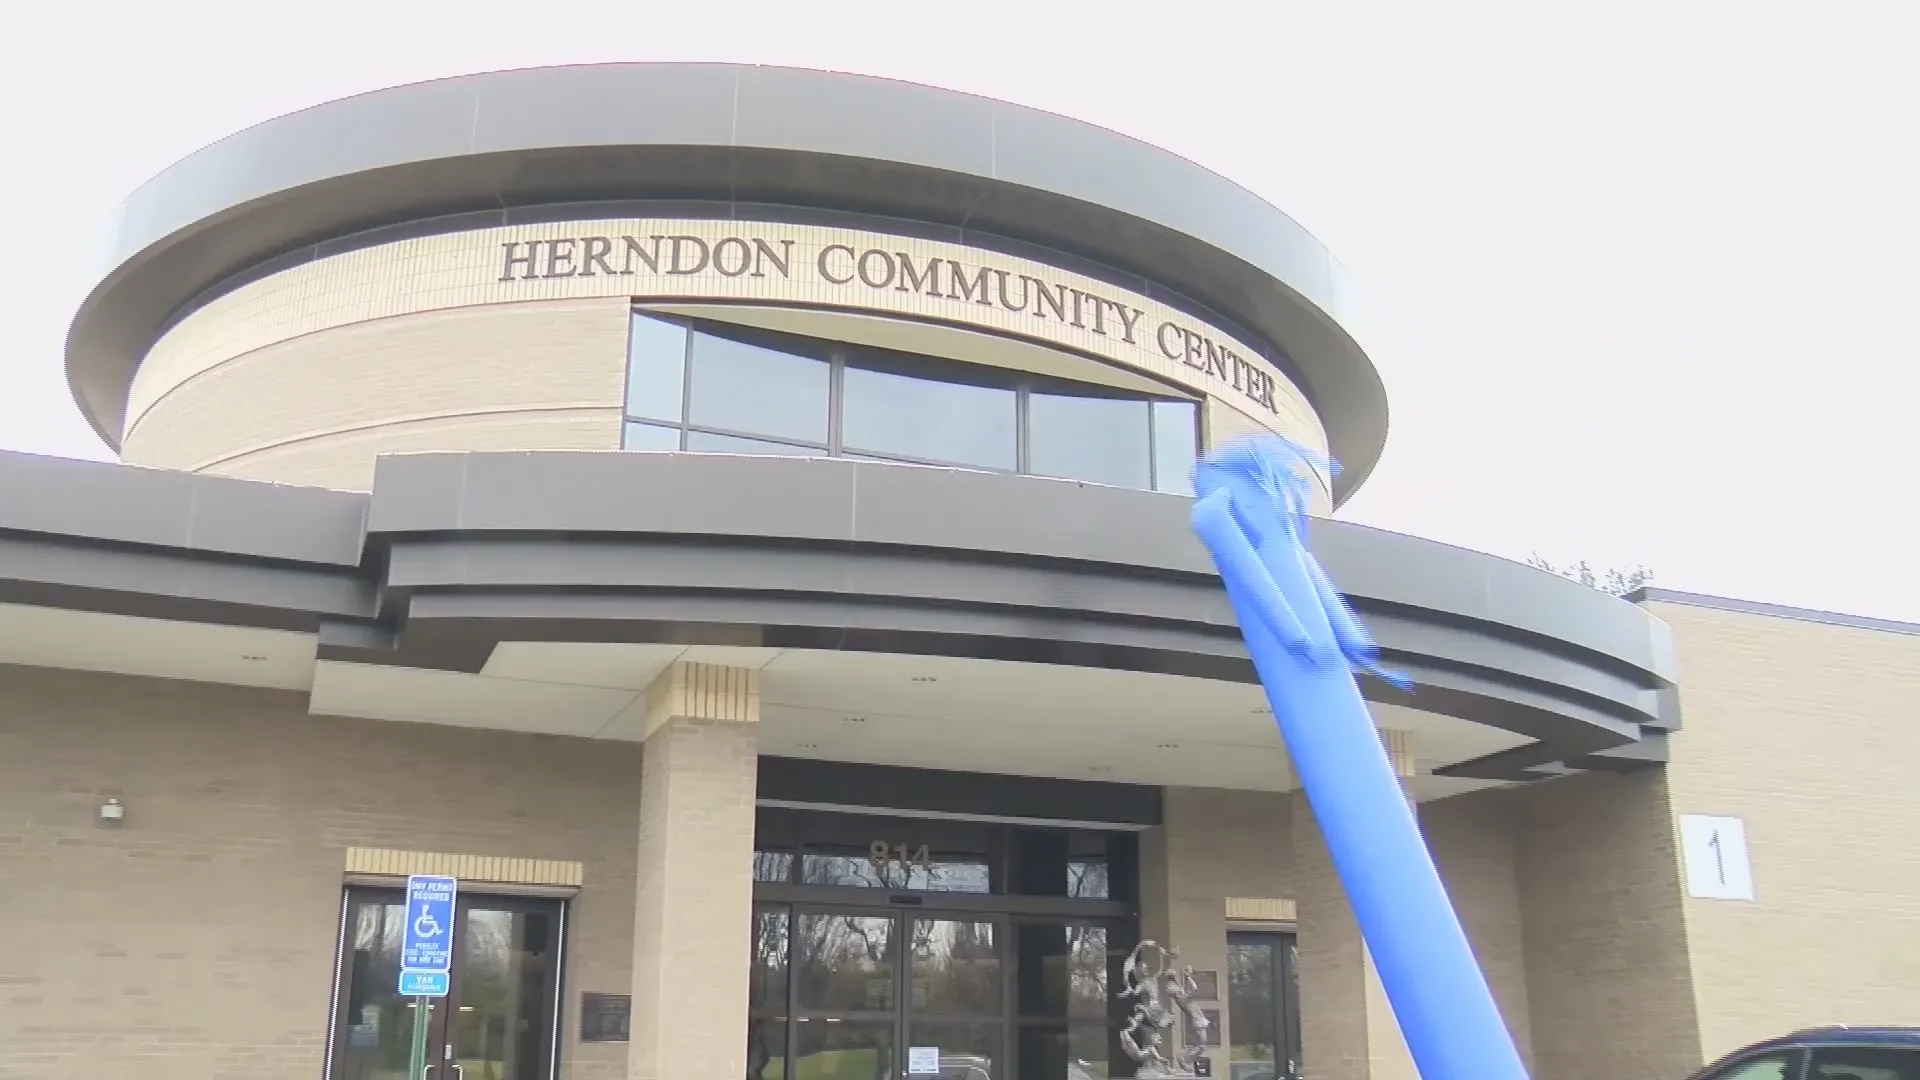 Things To Do In Herndon, VA